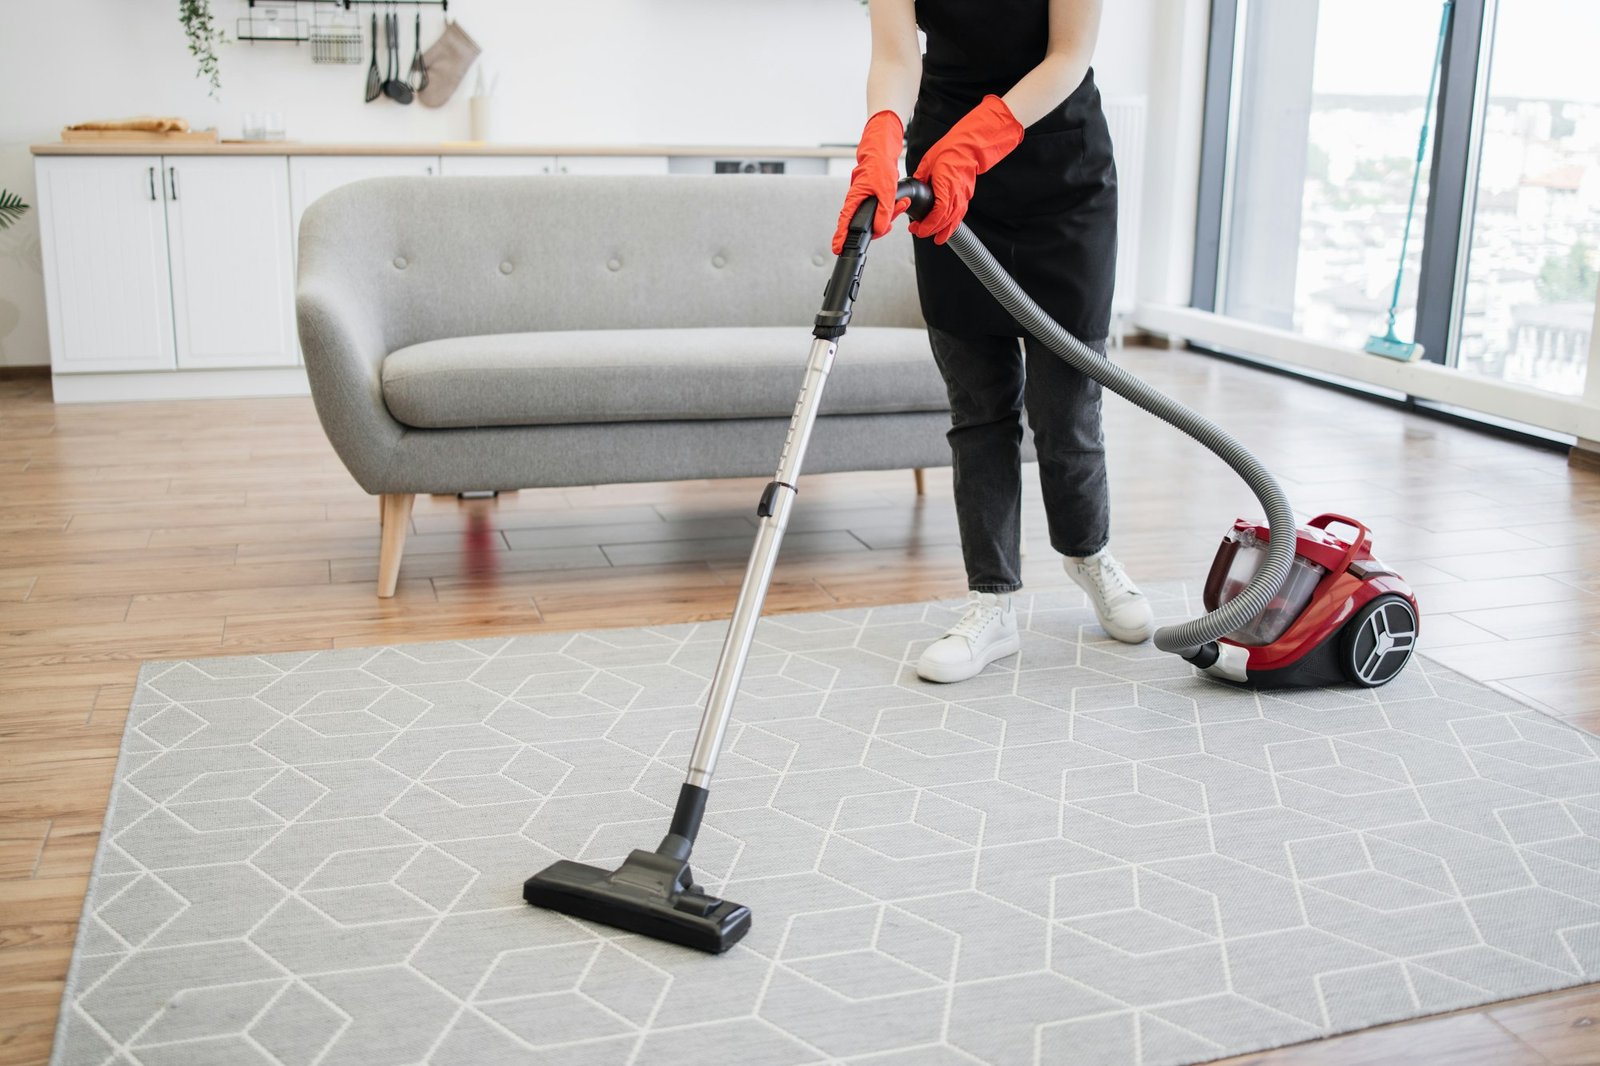 Cropped view of hands of woman cleaning service worker vacuuming carpet.